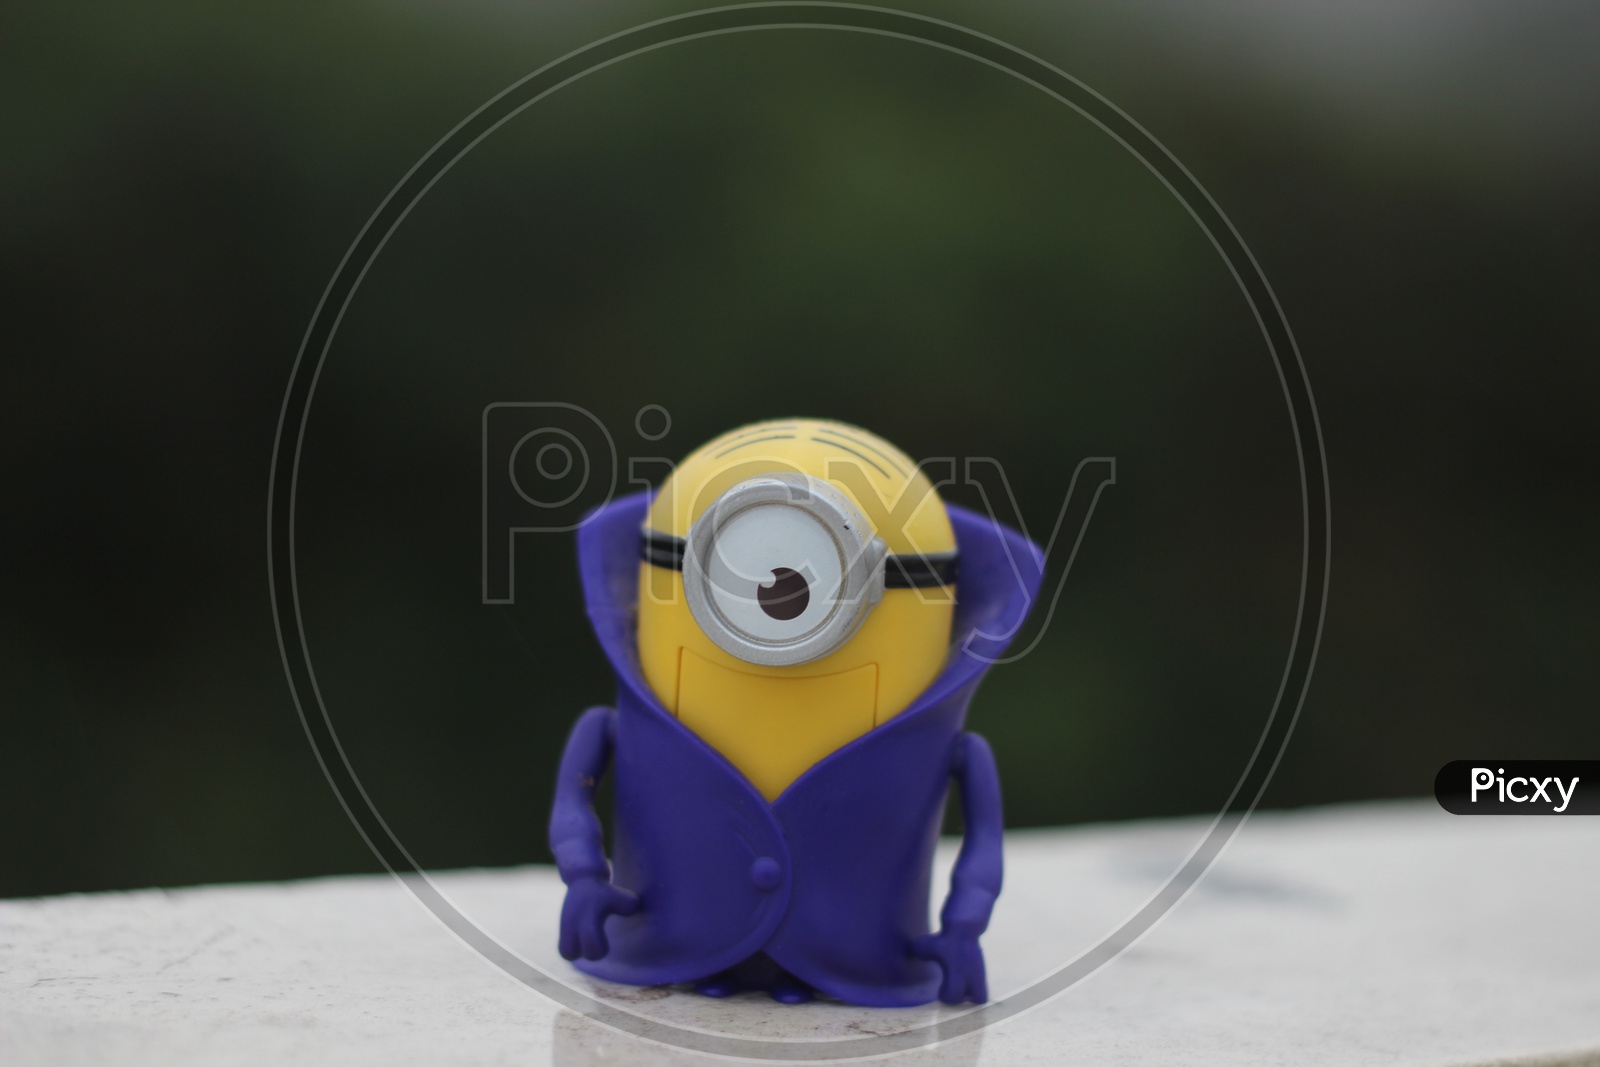 Toy Minion on the terrace